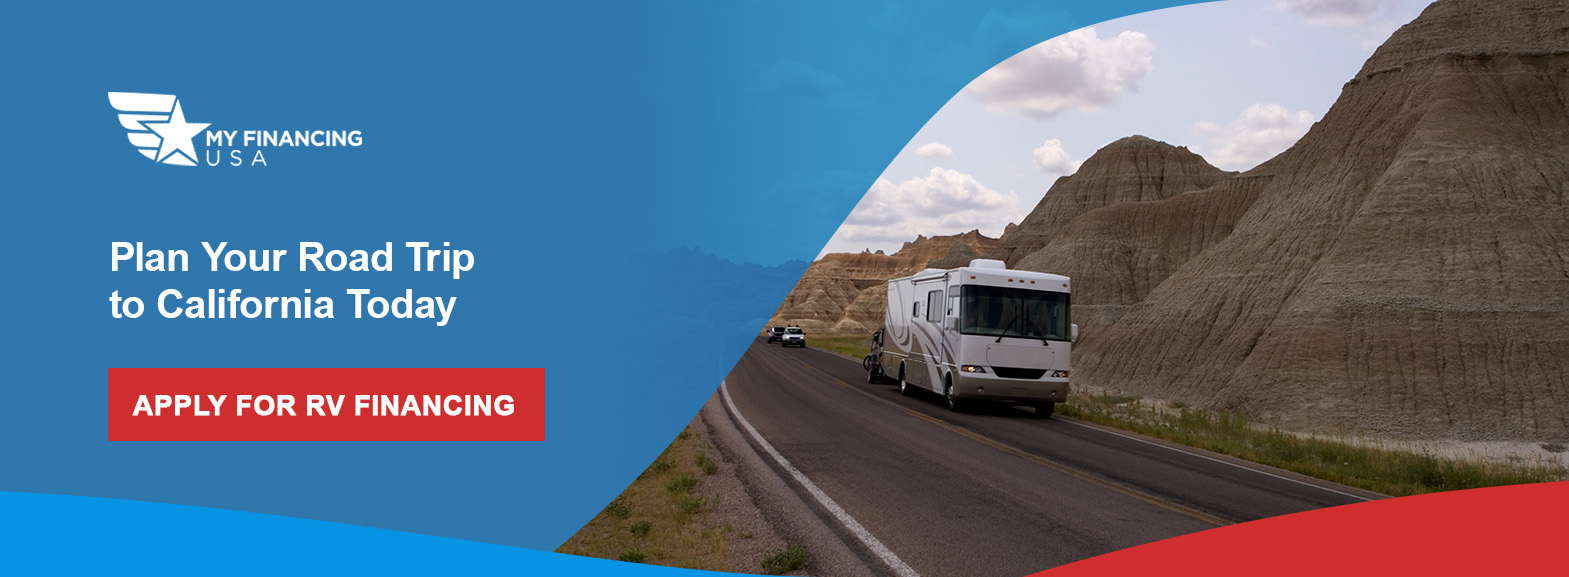 Plan Your Road Trip to California Today - Apply for RV Financing